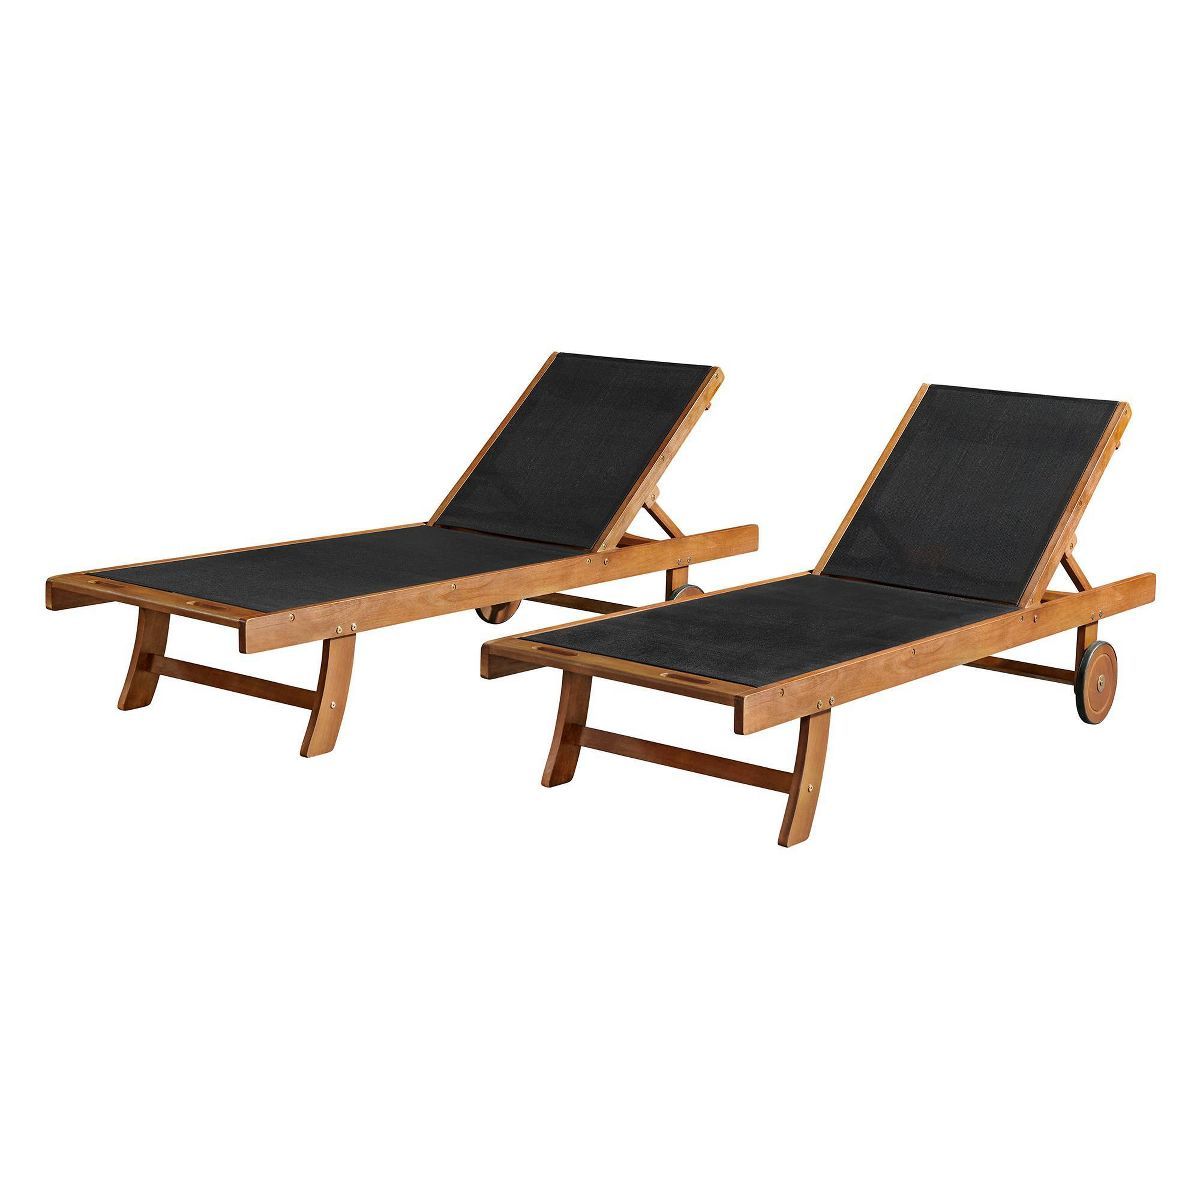 Caspian 2pk Eucalyptus Wood Outdoor Lounge Chairs with Mesh Seating - Natural - Alaterre Furnitur... | Target